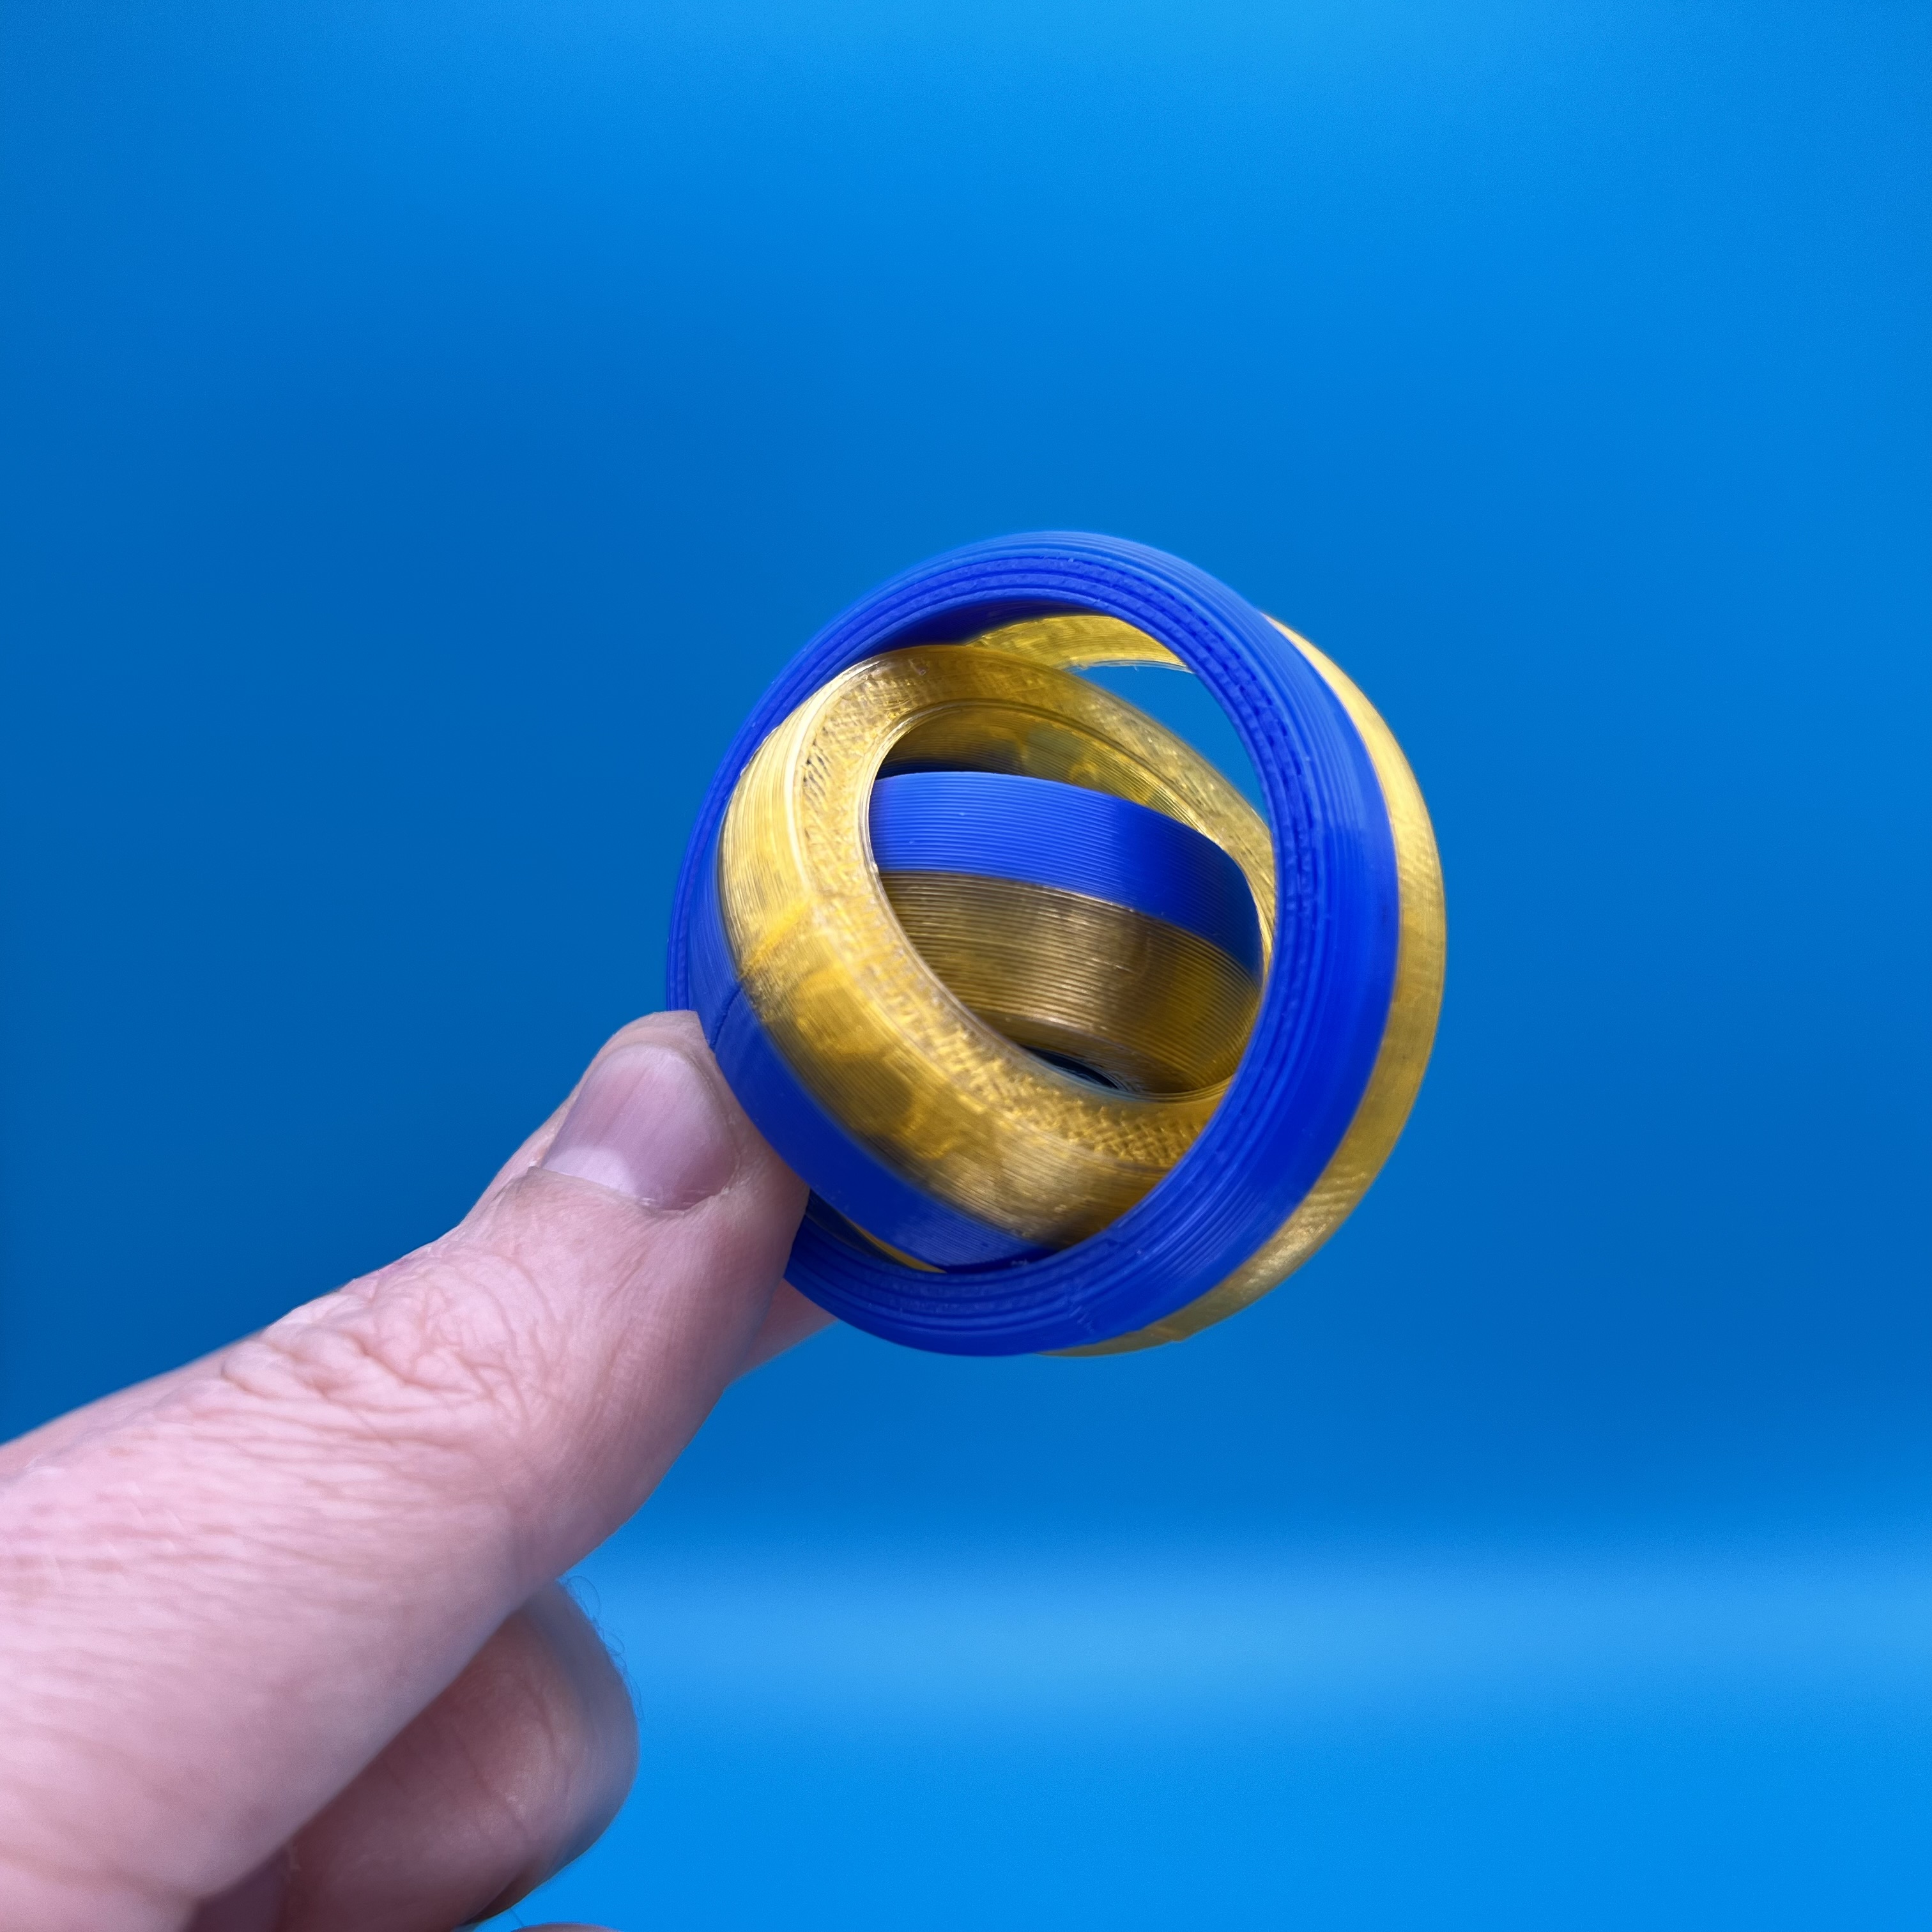 SpinRings - The perfect Fidget Spinner (probably)